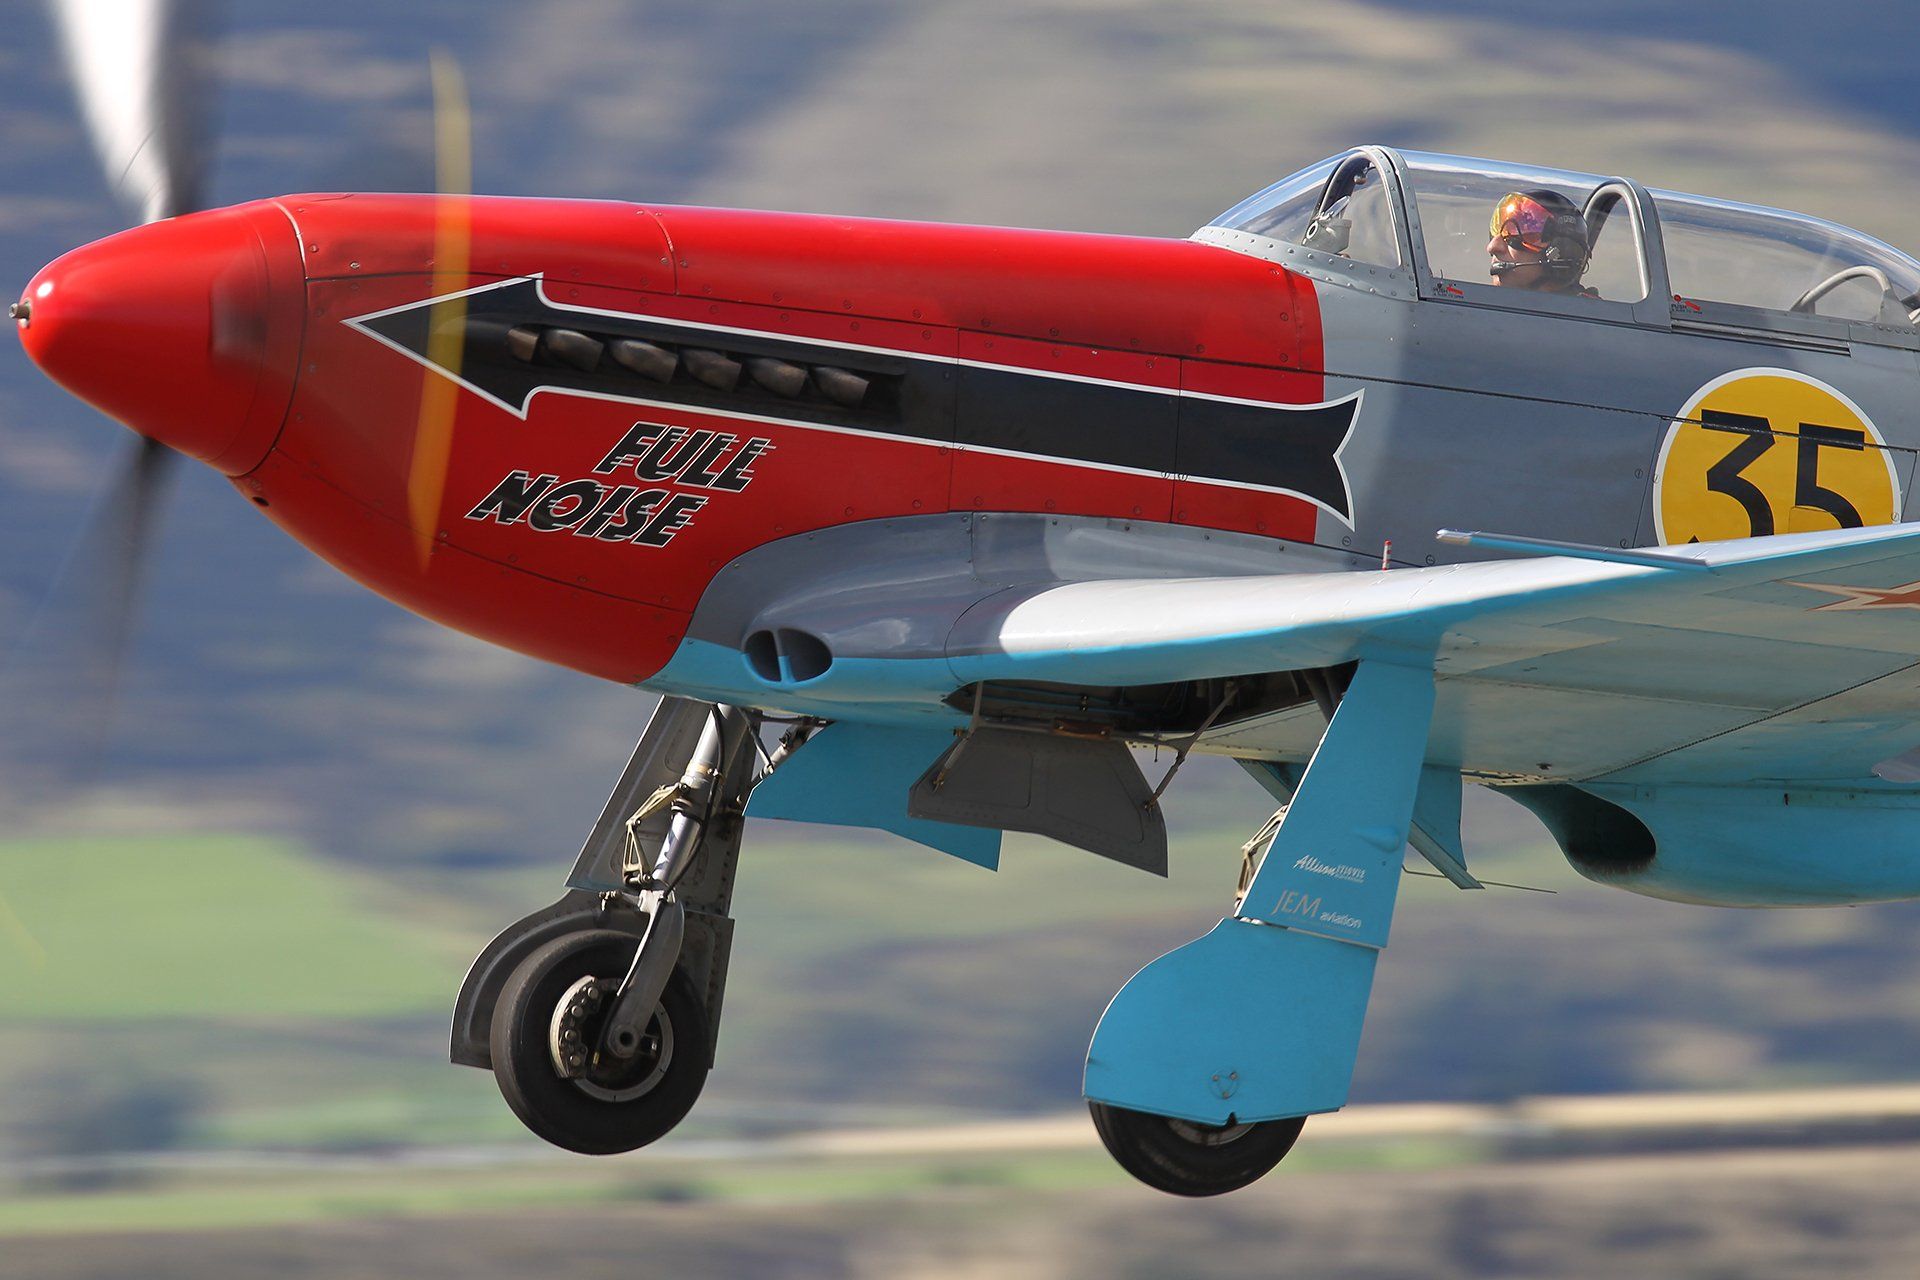 Full Noise Yak 3 fighter plane from Fighter Flights in Marlborough, New Zealand